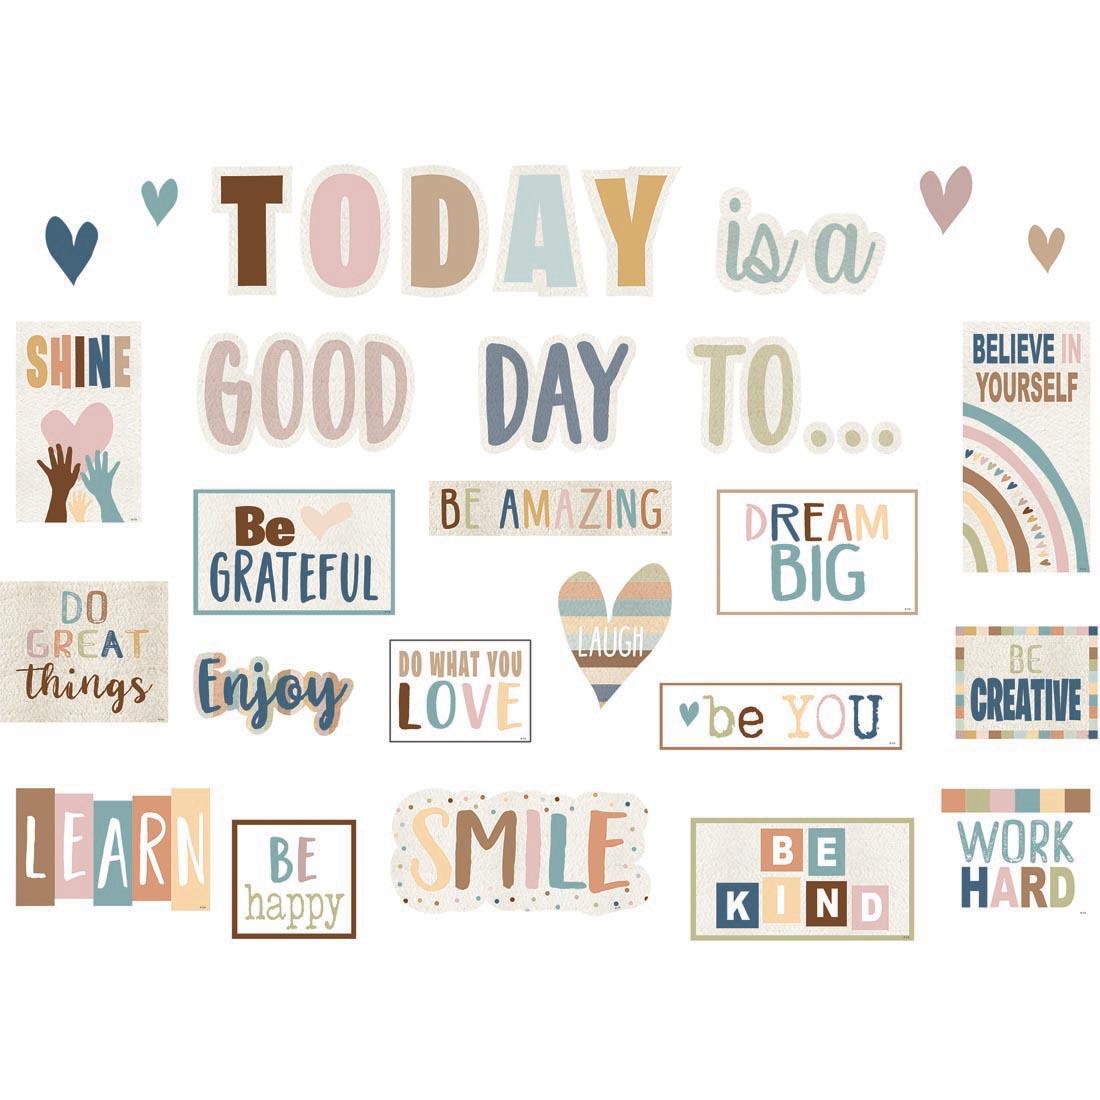 Today is a Good Day Mini Bulletin Board Set from the Everyone is Welcome collection by Teacher Created Resources